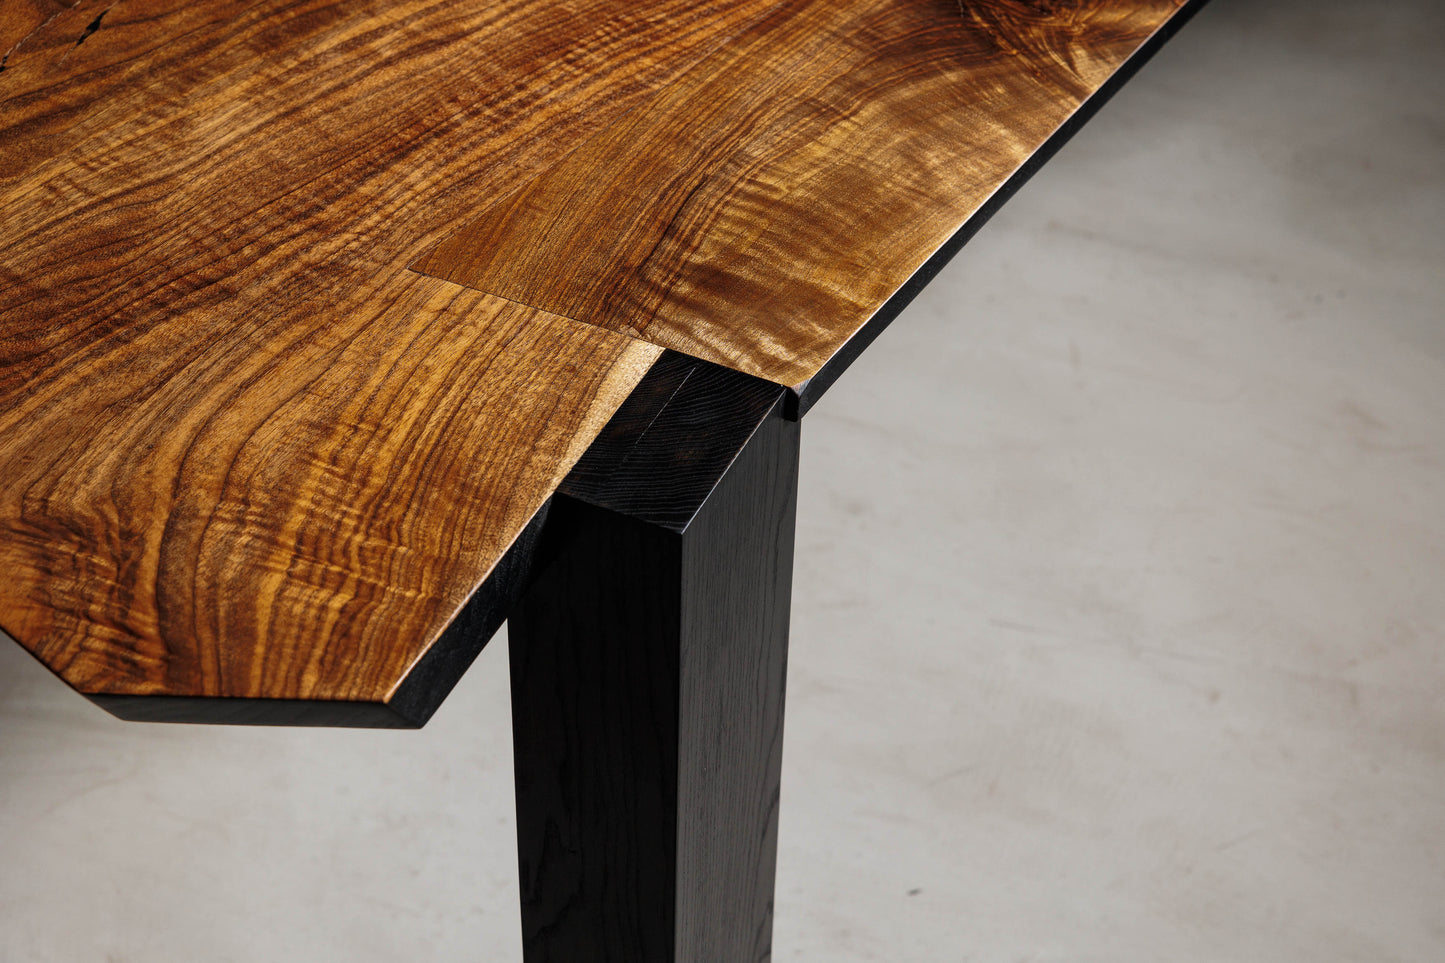 EM201 Of 18Brut Collection | Close-up image showing the joinery details between the walnut top and ash leg. 